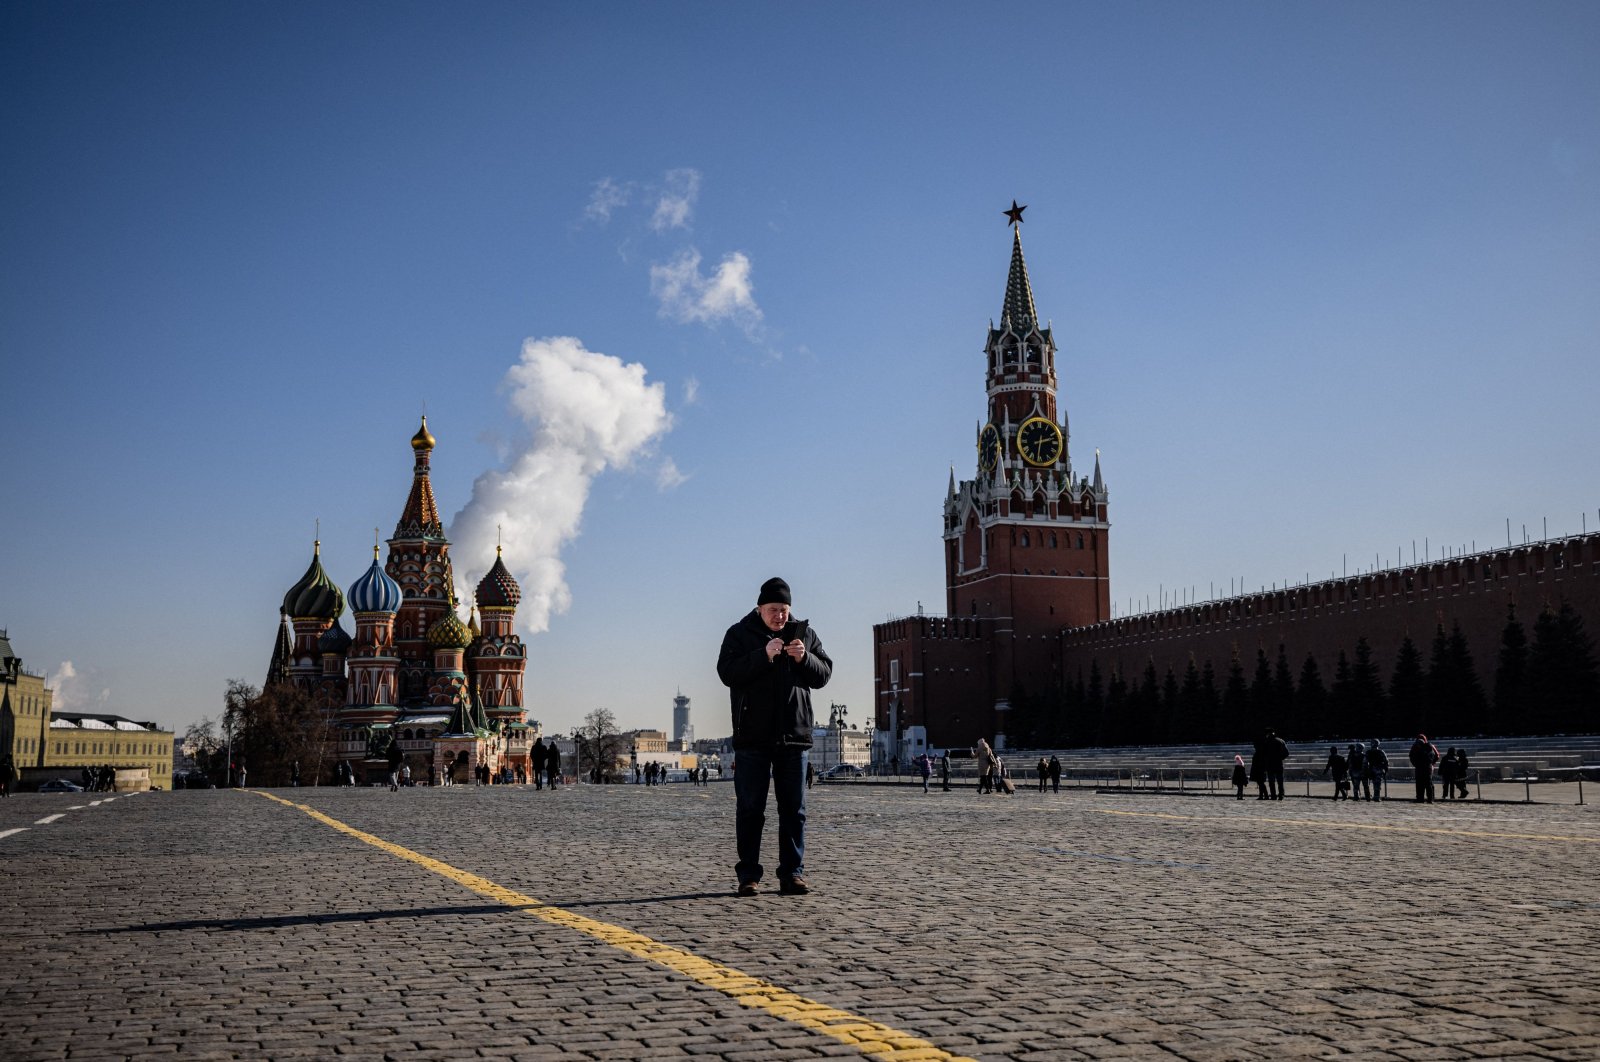 A man uses his mobile phone on Red Square in downtown Moscow, Russia, March 10, 2021. (AFP Photo)